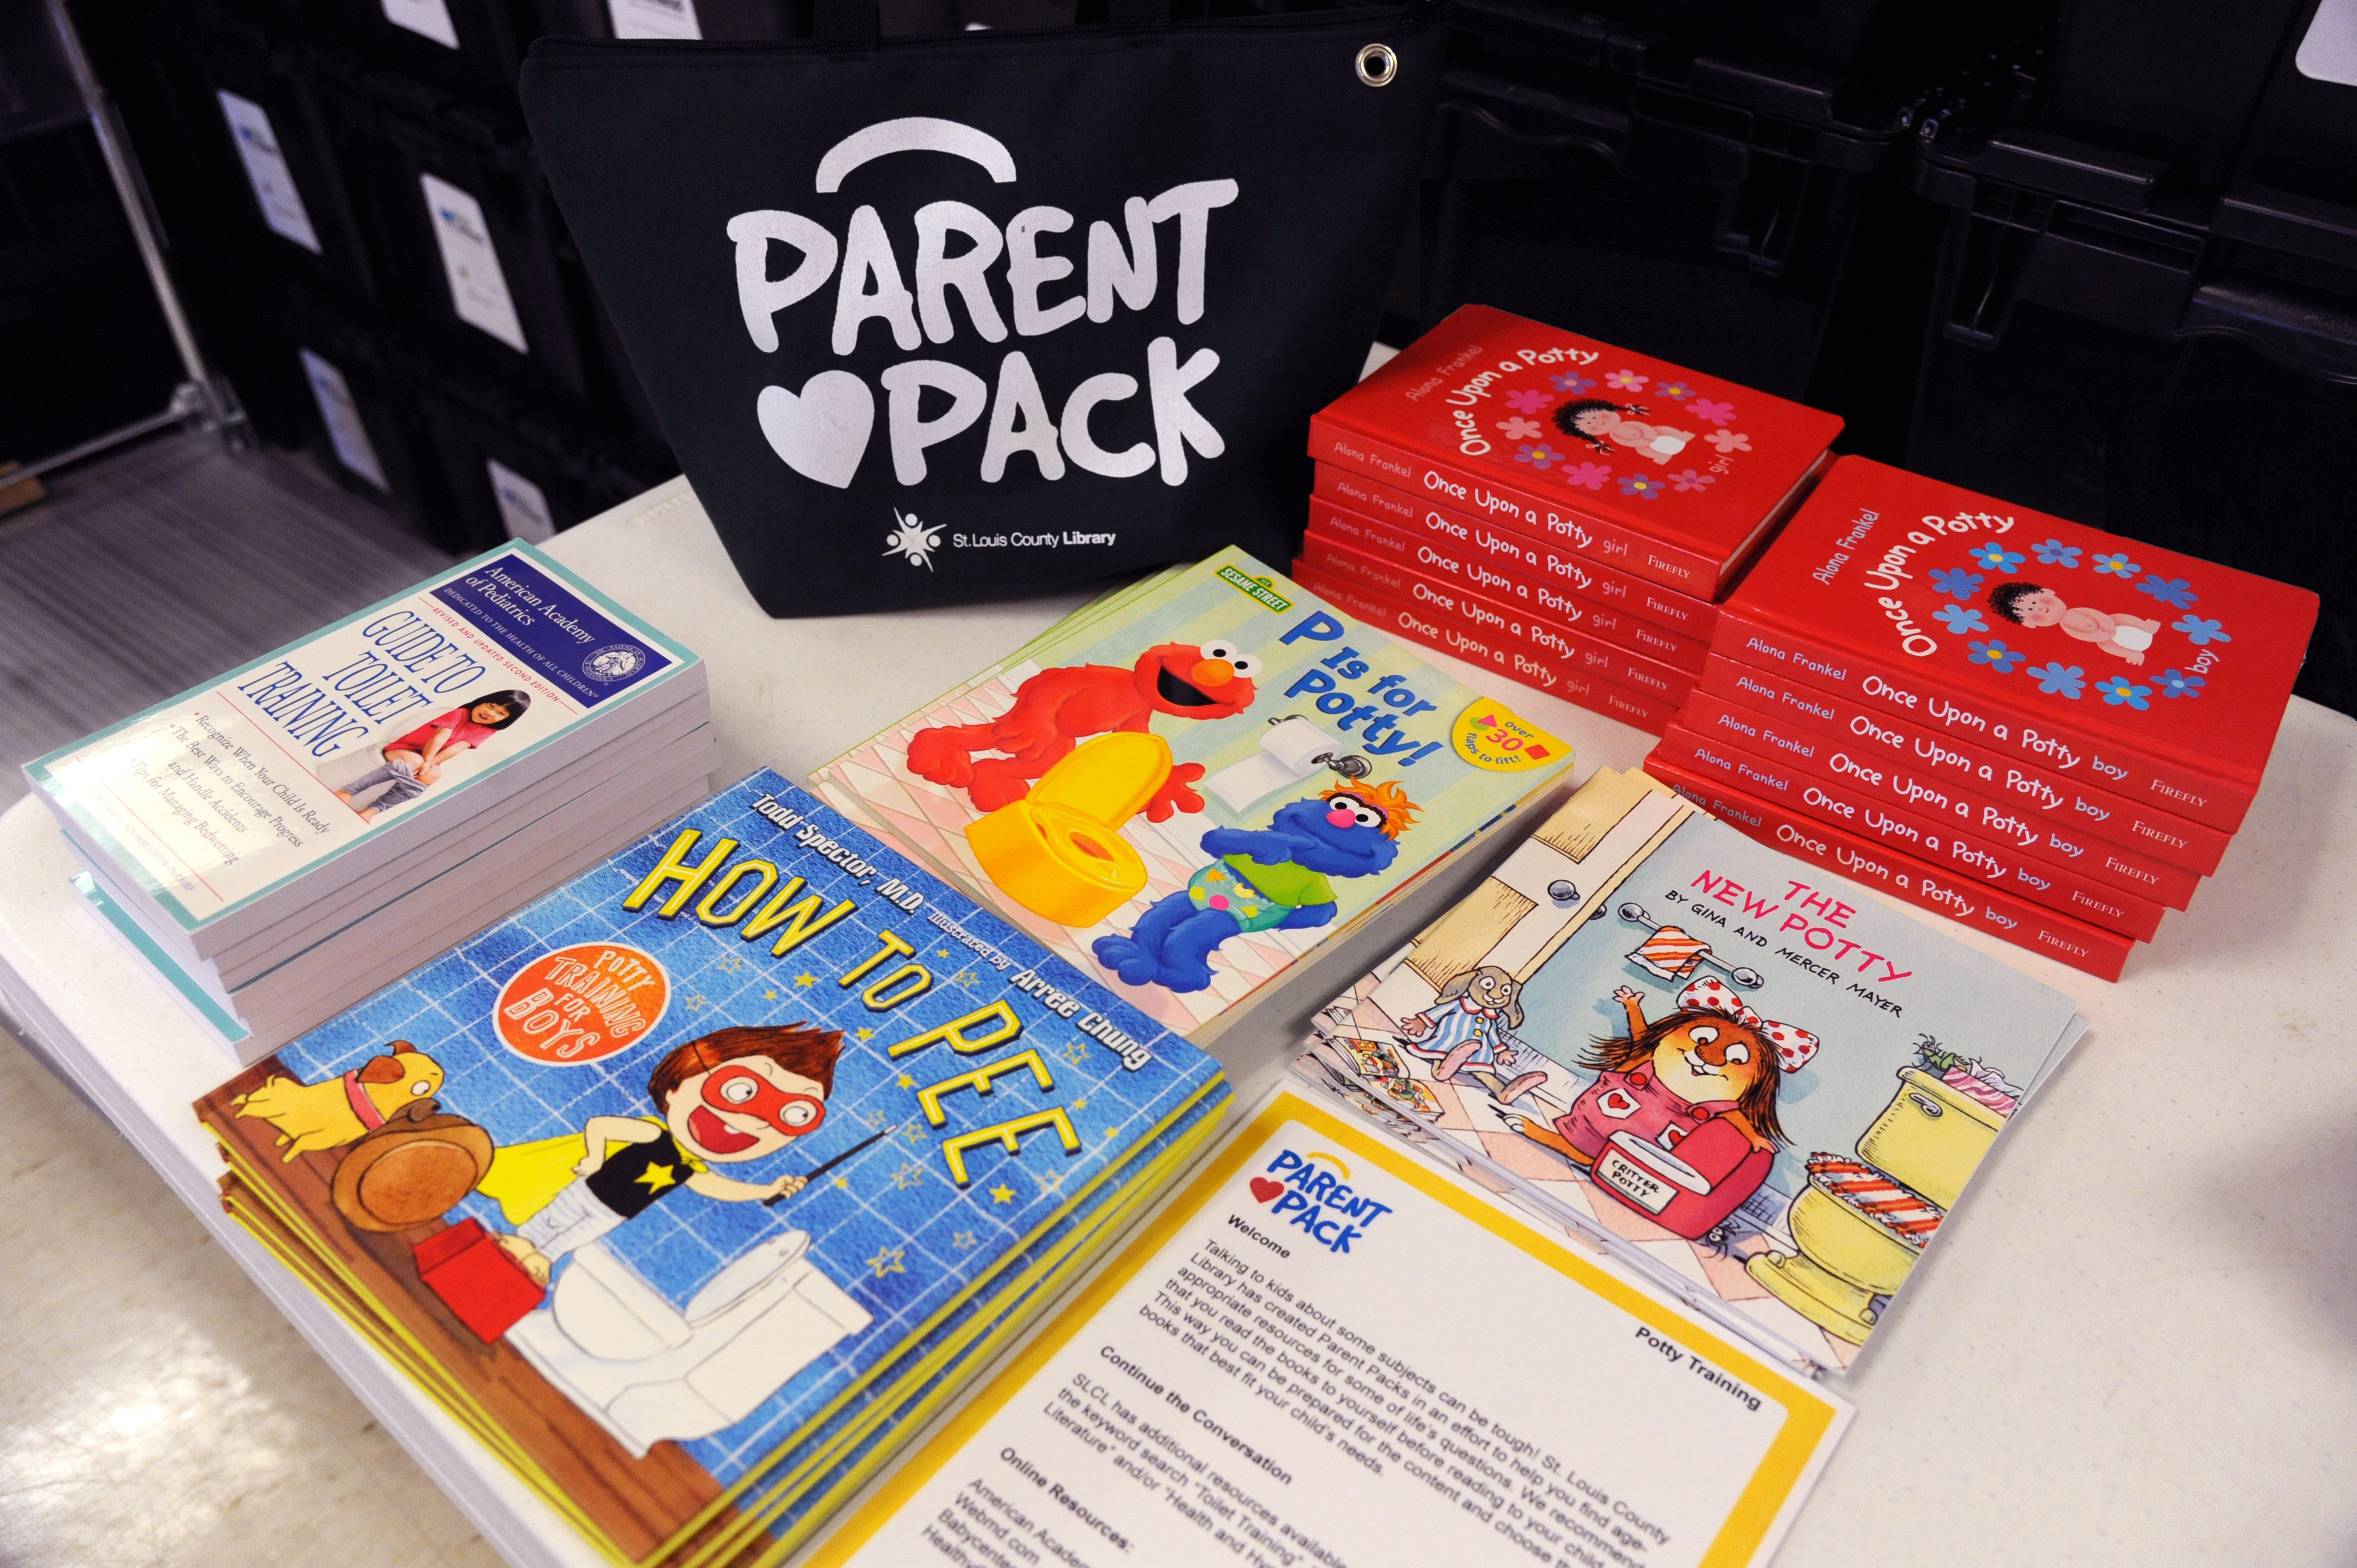 Dark blue bag with Parent Pack and a heart printed in white on it with books on potty training stacked on a table